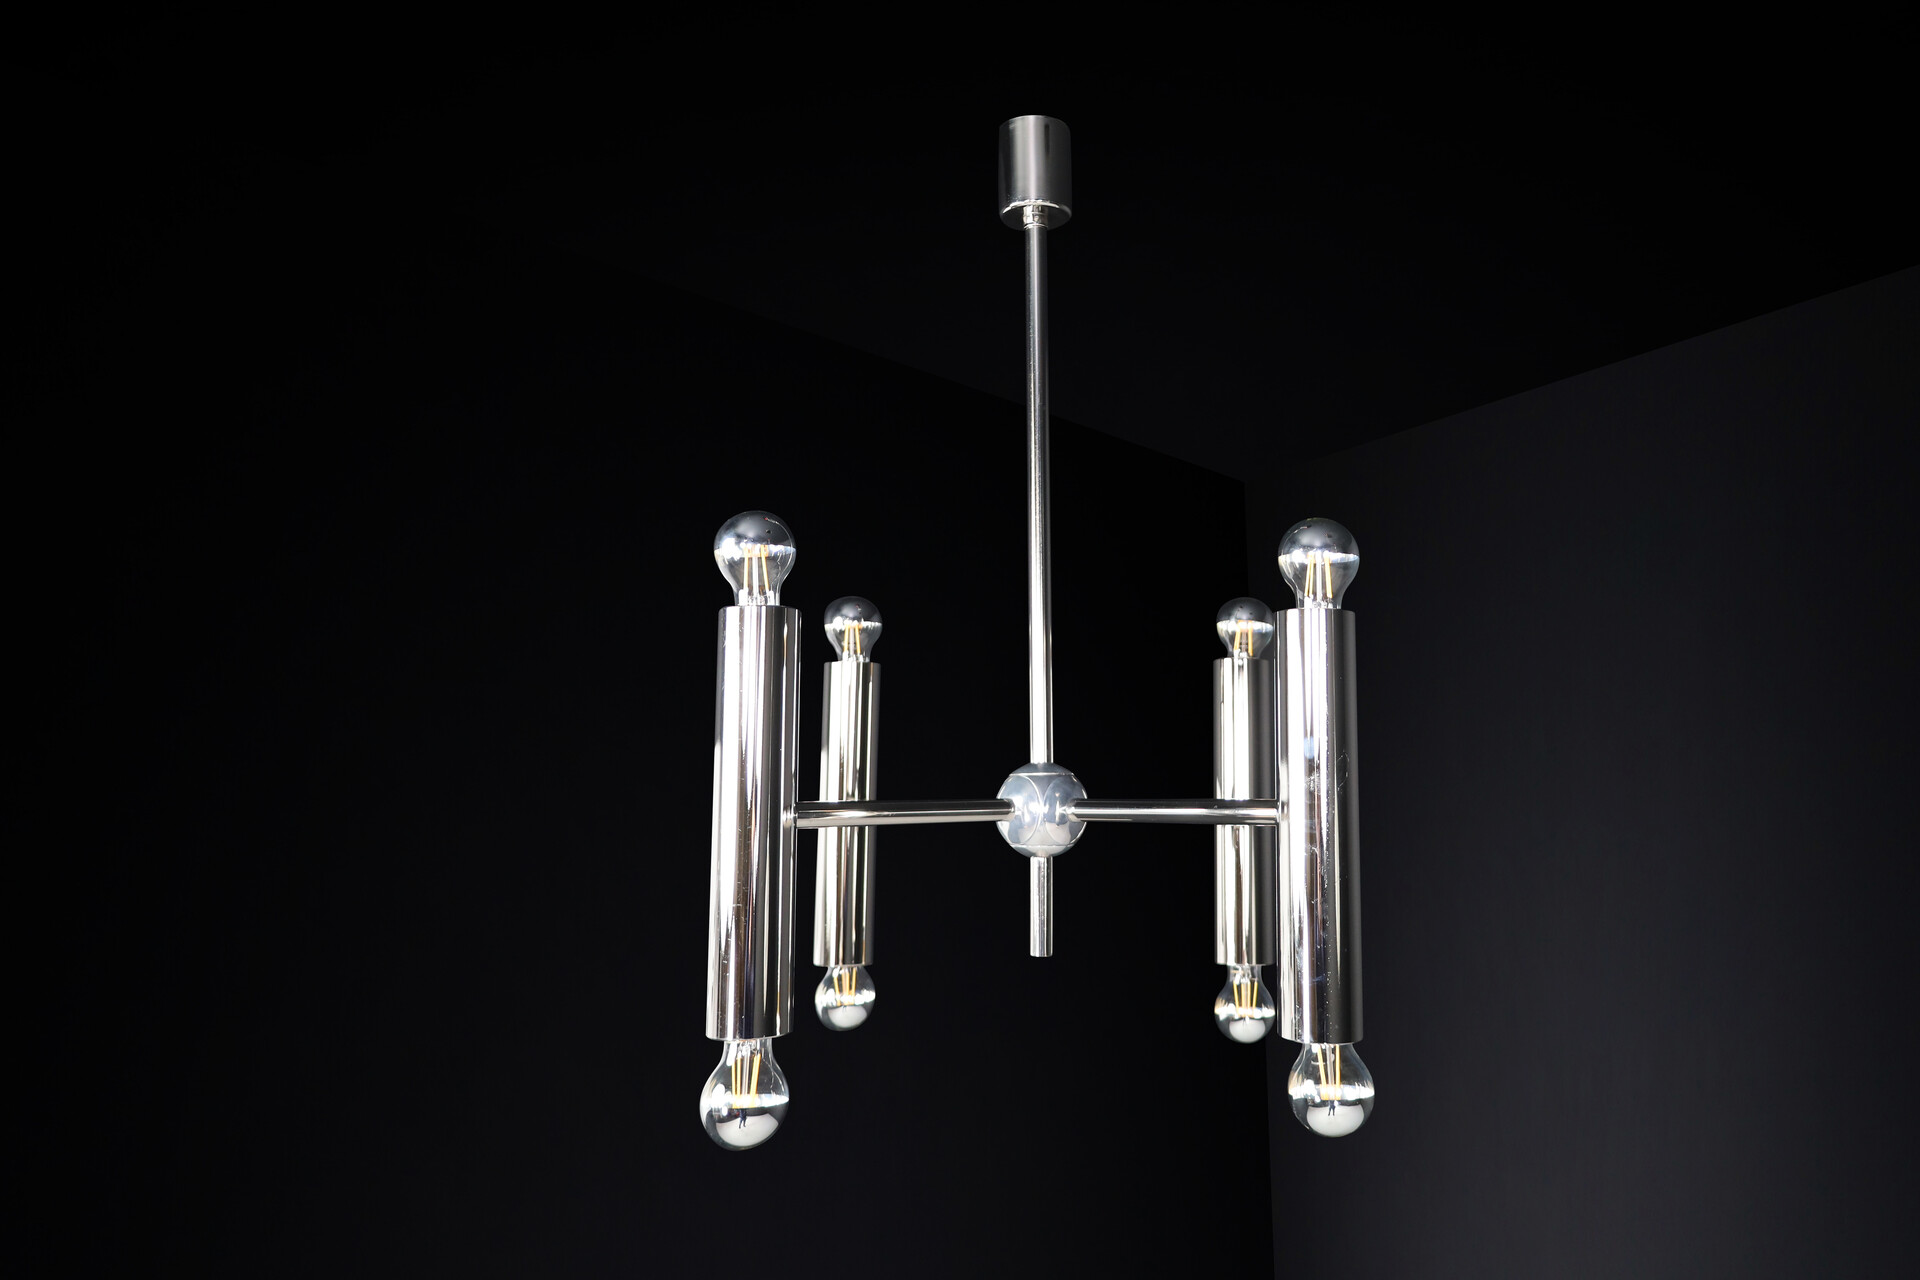 Mid century modern Chandelier in polished steel with Eight lights, Germany 1960 Mid-20th century